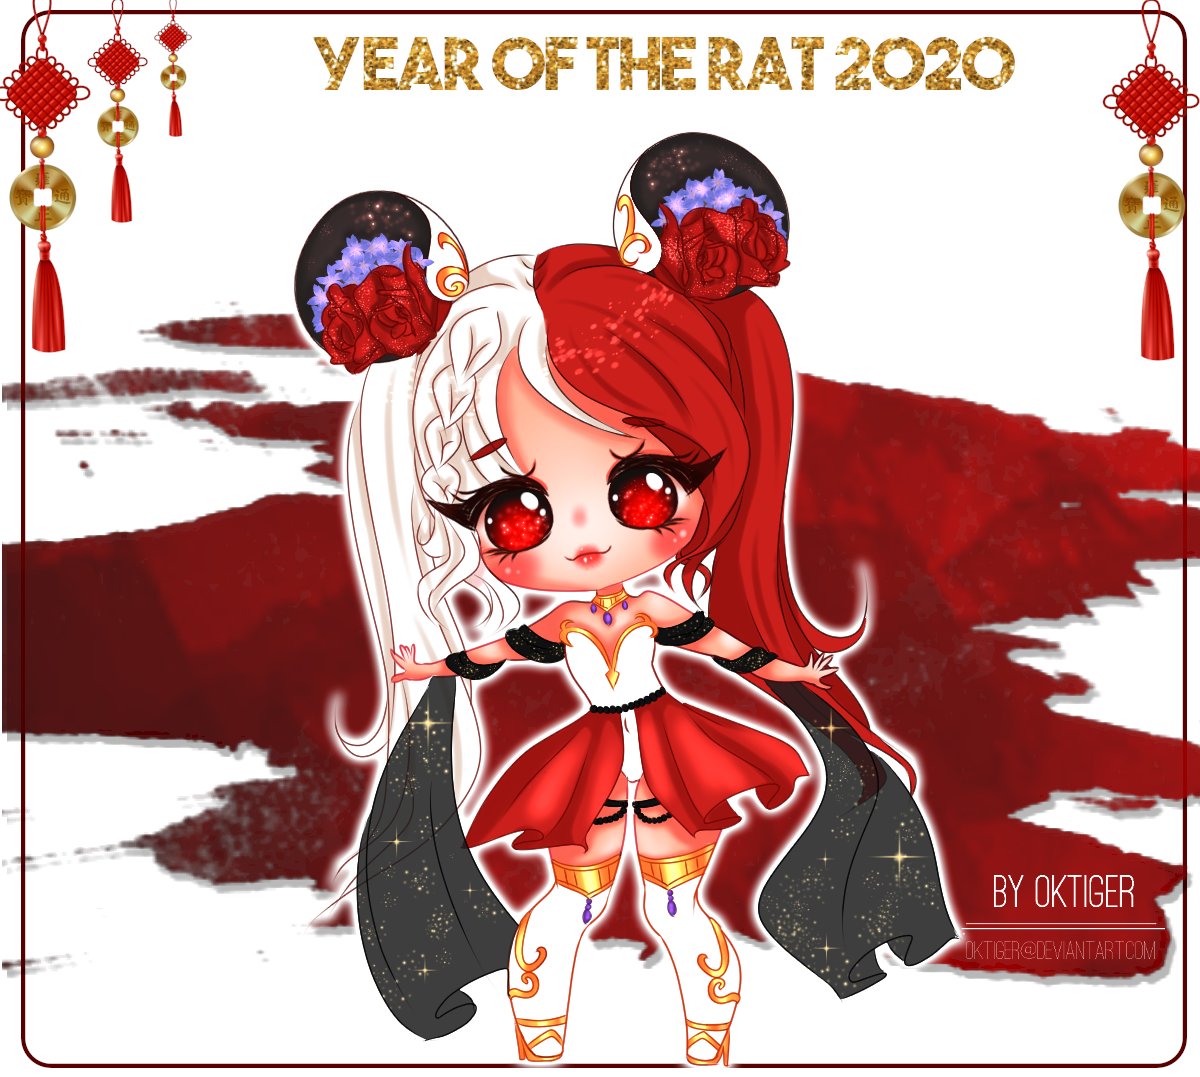 Lunar Year Adoptable still Open
Year of the Rat~ This cutie is looking for a home

PRICE 25 €

#adoptable #lunaryear #kemonomimi #chibi #artist #anime #cuteart #artmoots #commission #ArtistOnTwitter #Adopt #art